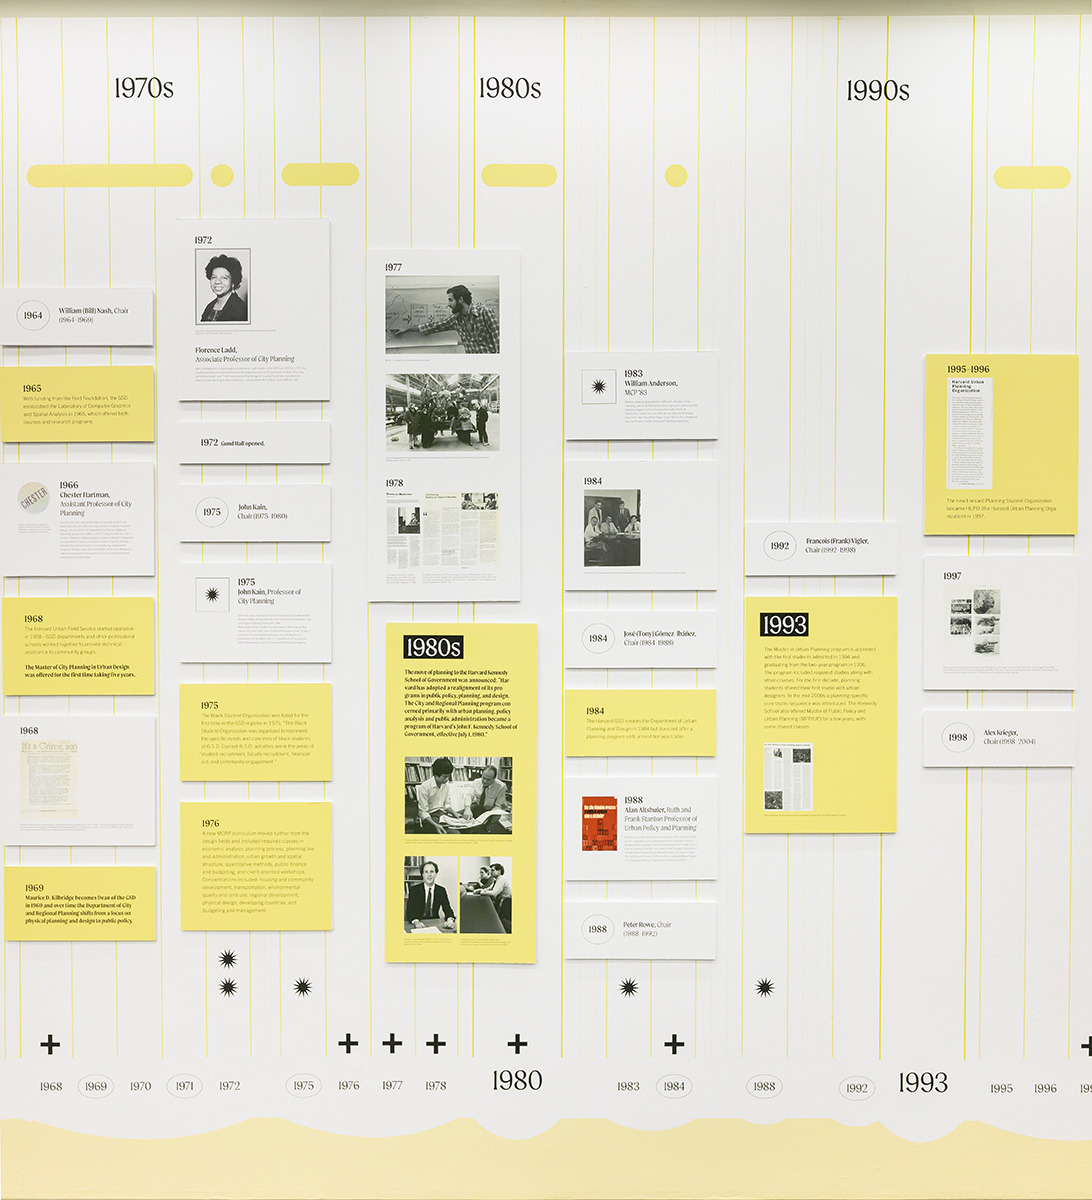 A detail of the timeline showing images and text from the 1970s through 1990s